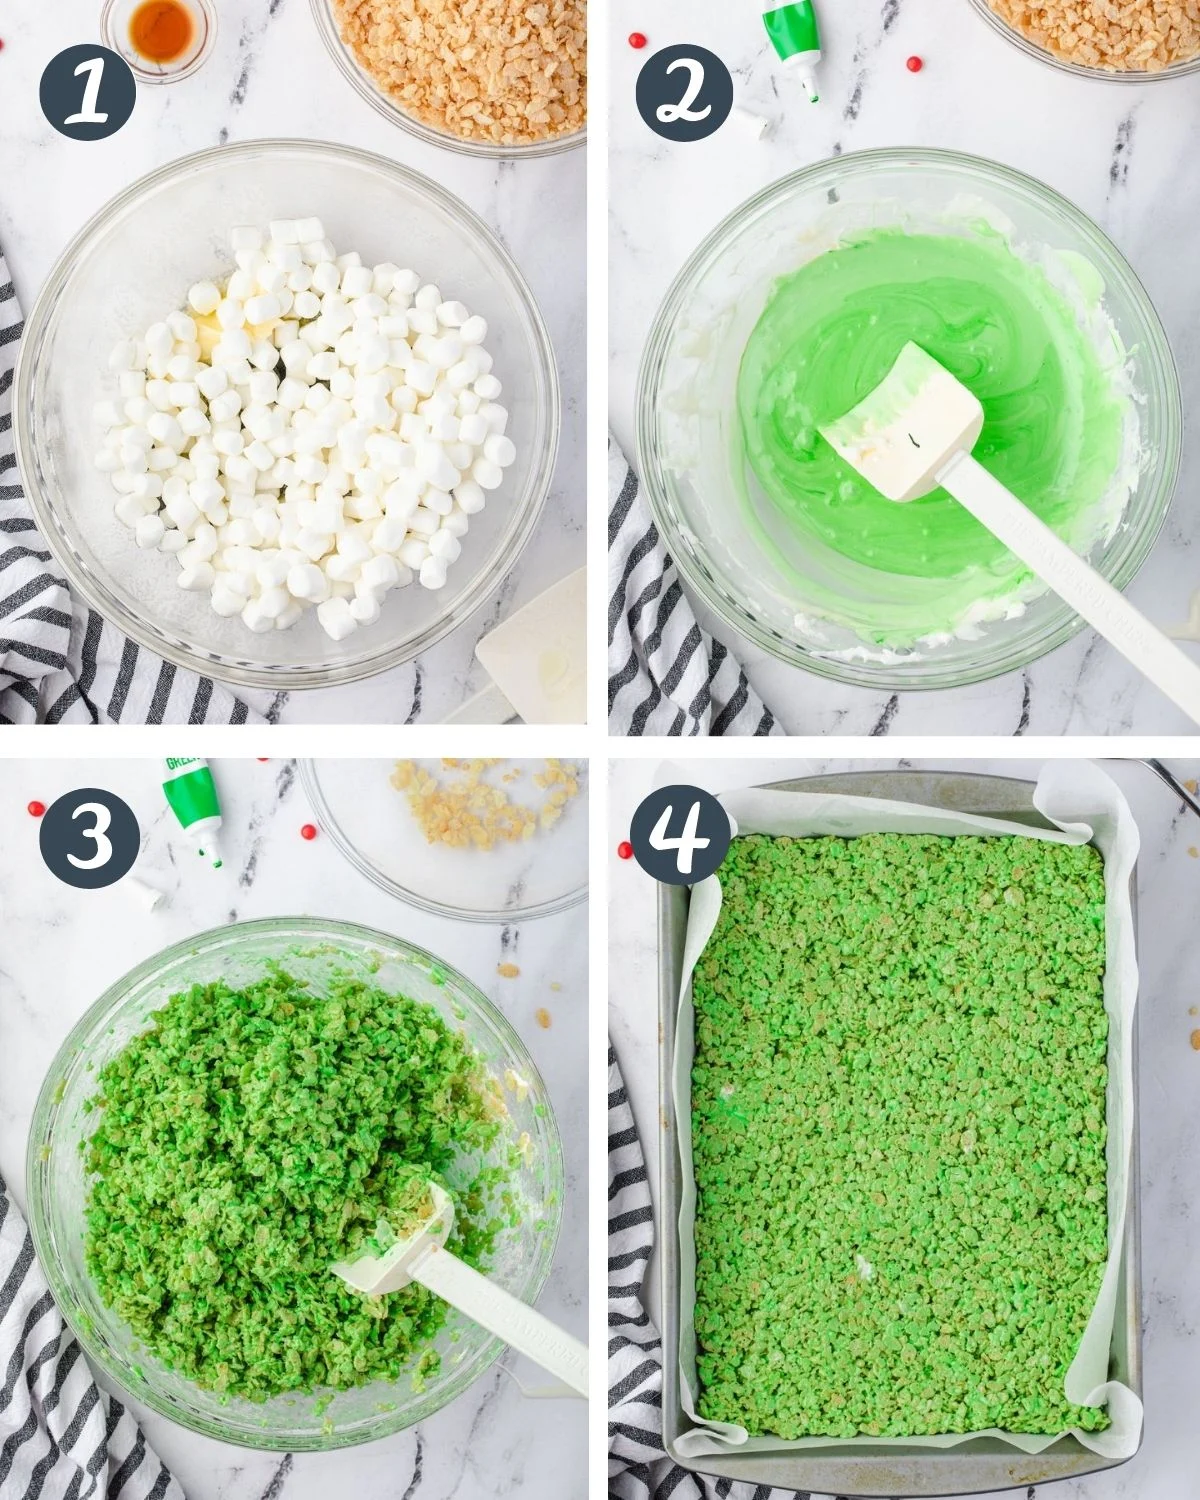 Collage showing 4 steps for making Christmas Rice Krispie Treats.